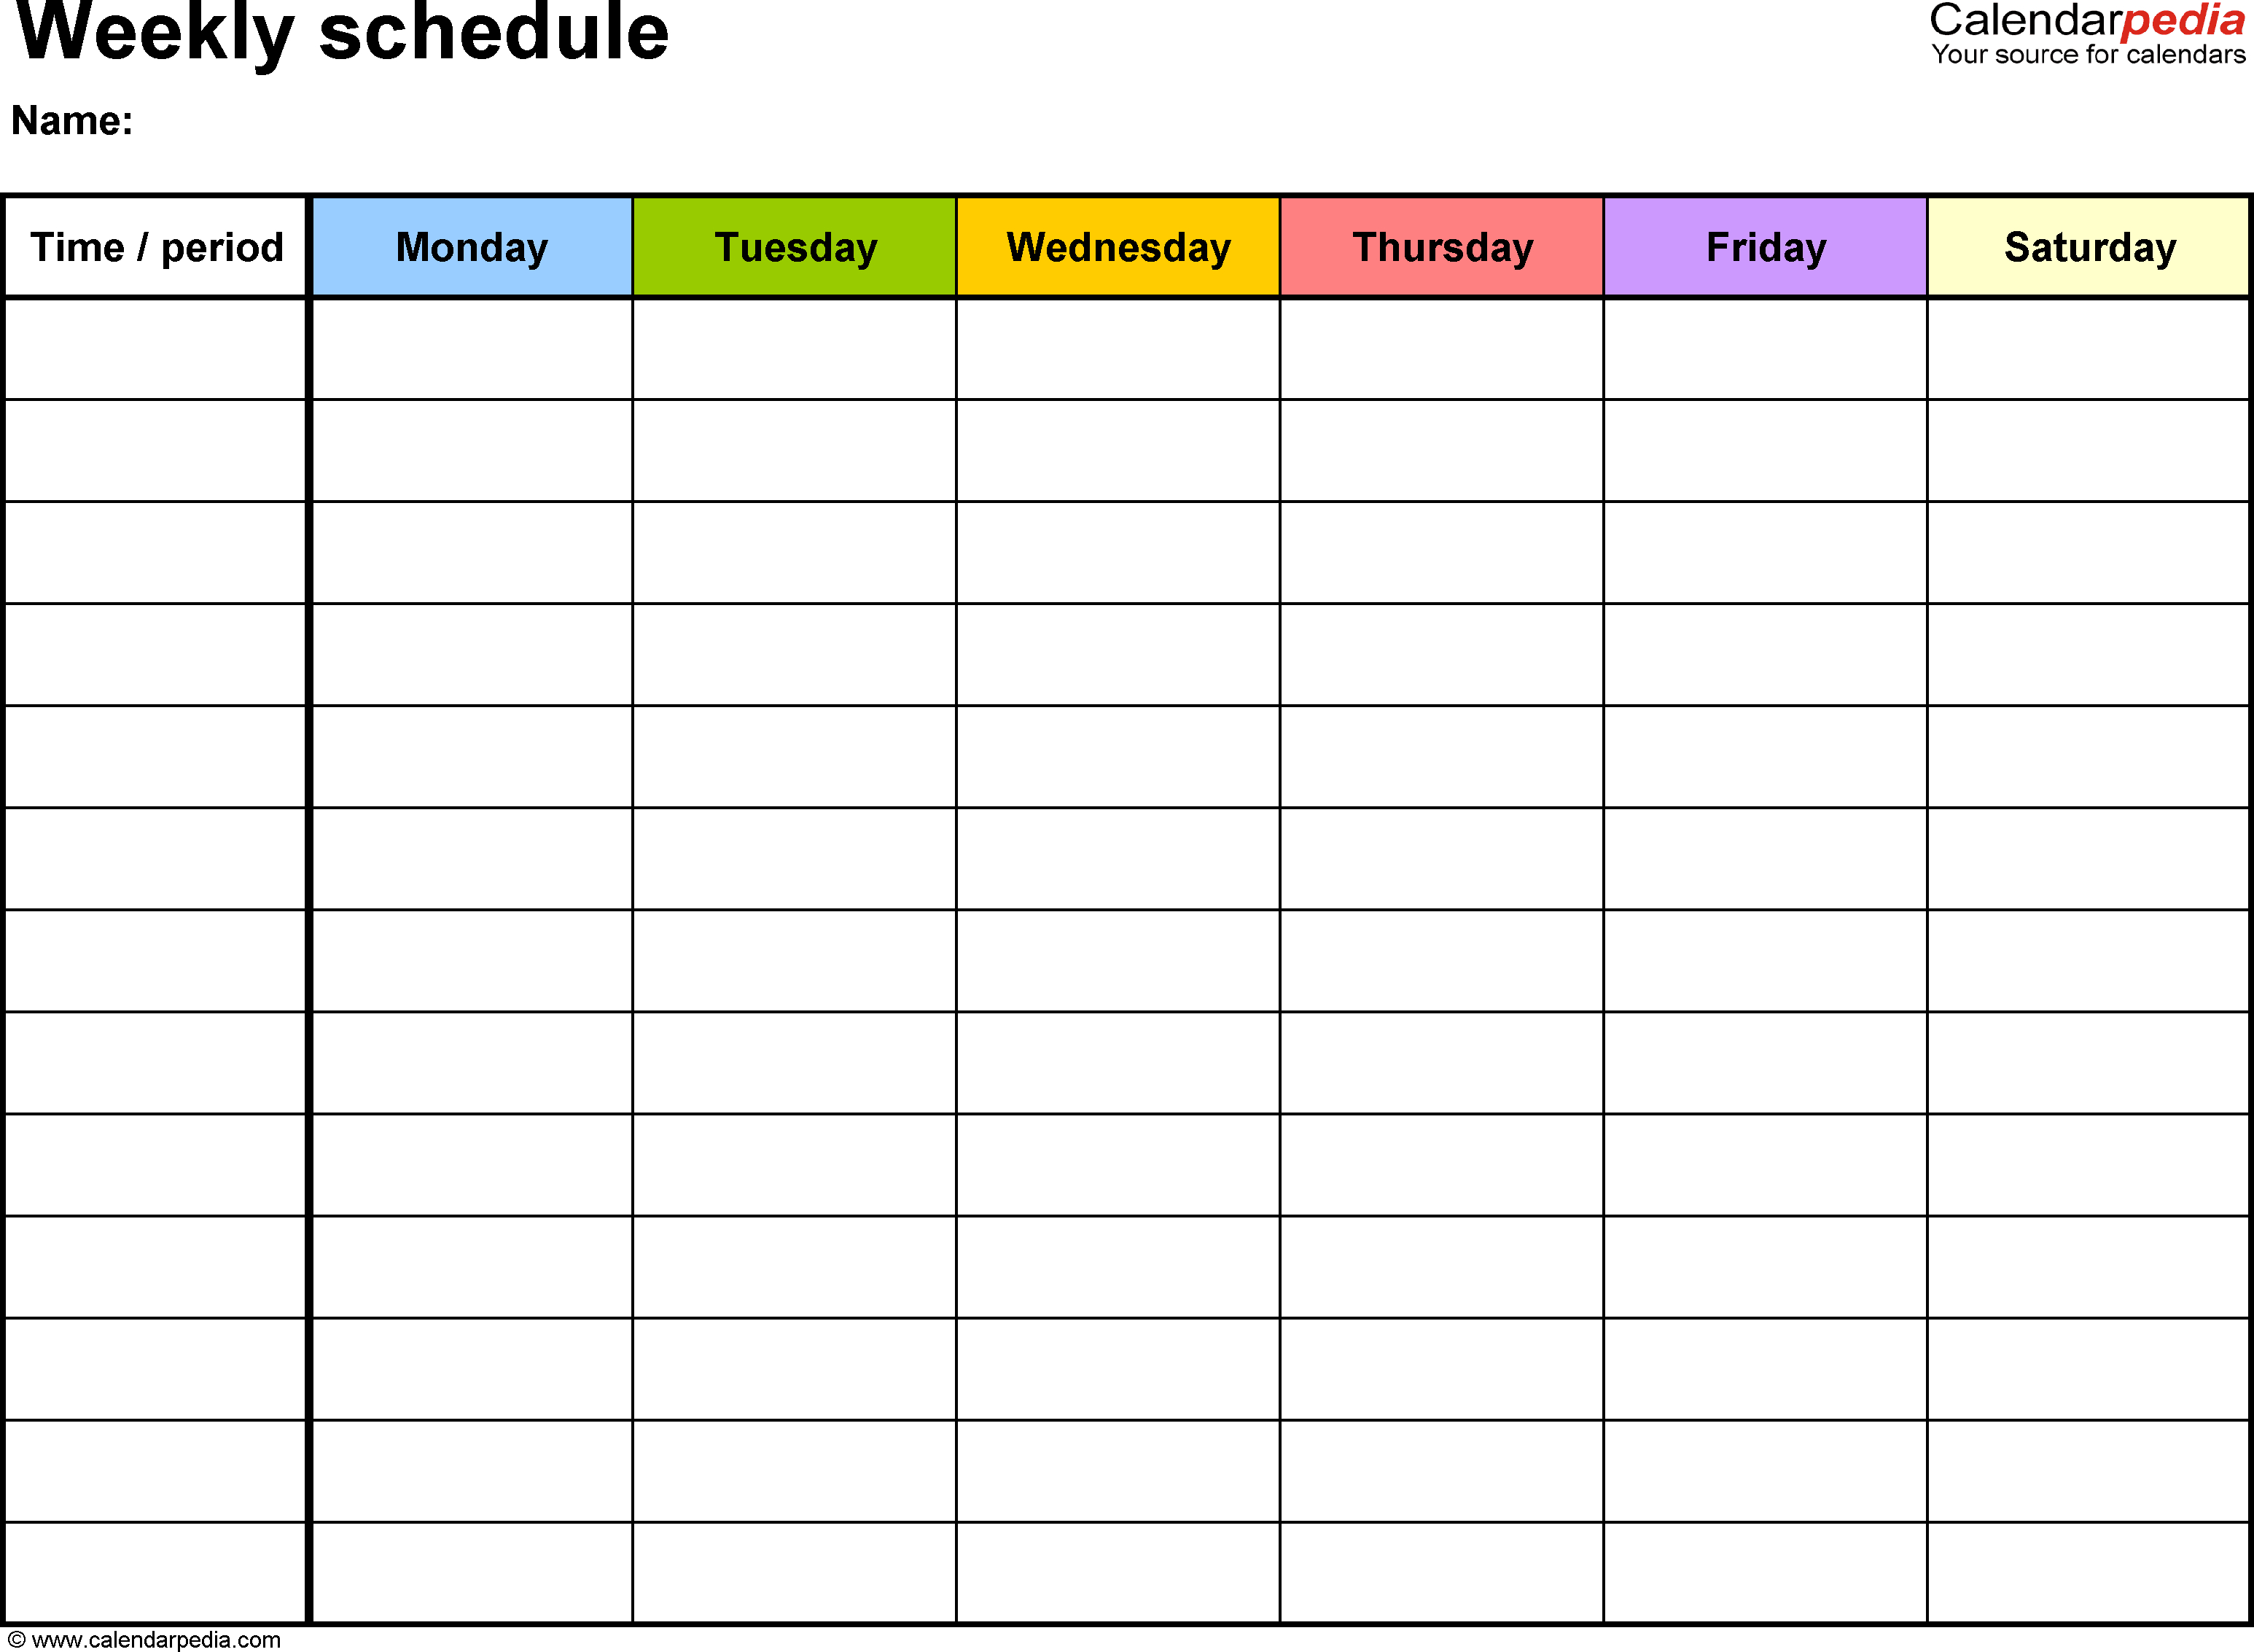 Free Weekly Schedule Templates For Word - 18 Templates - Free Printable Weekly Schedule